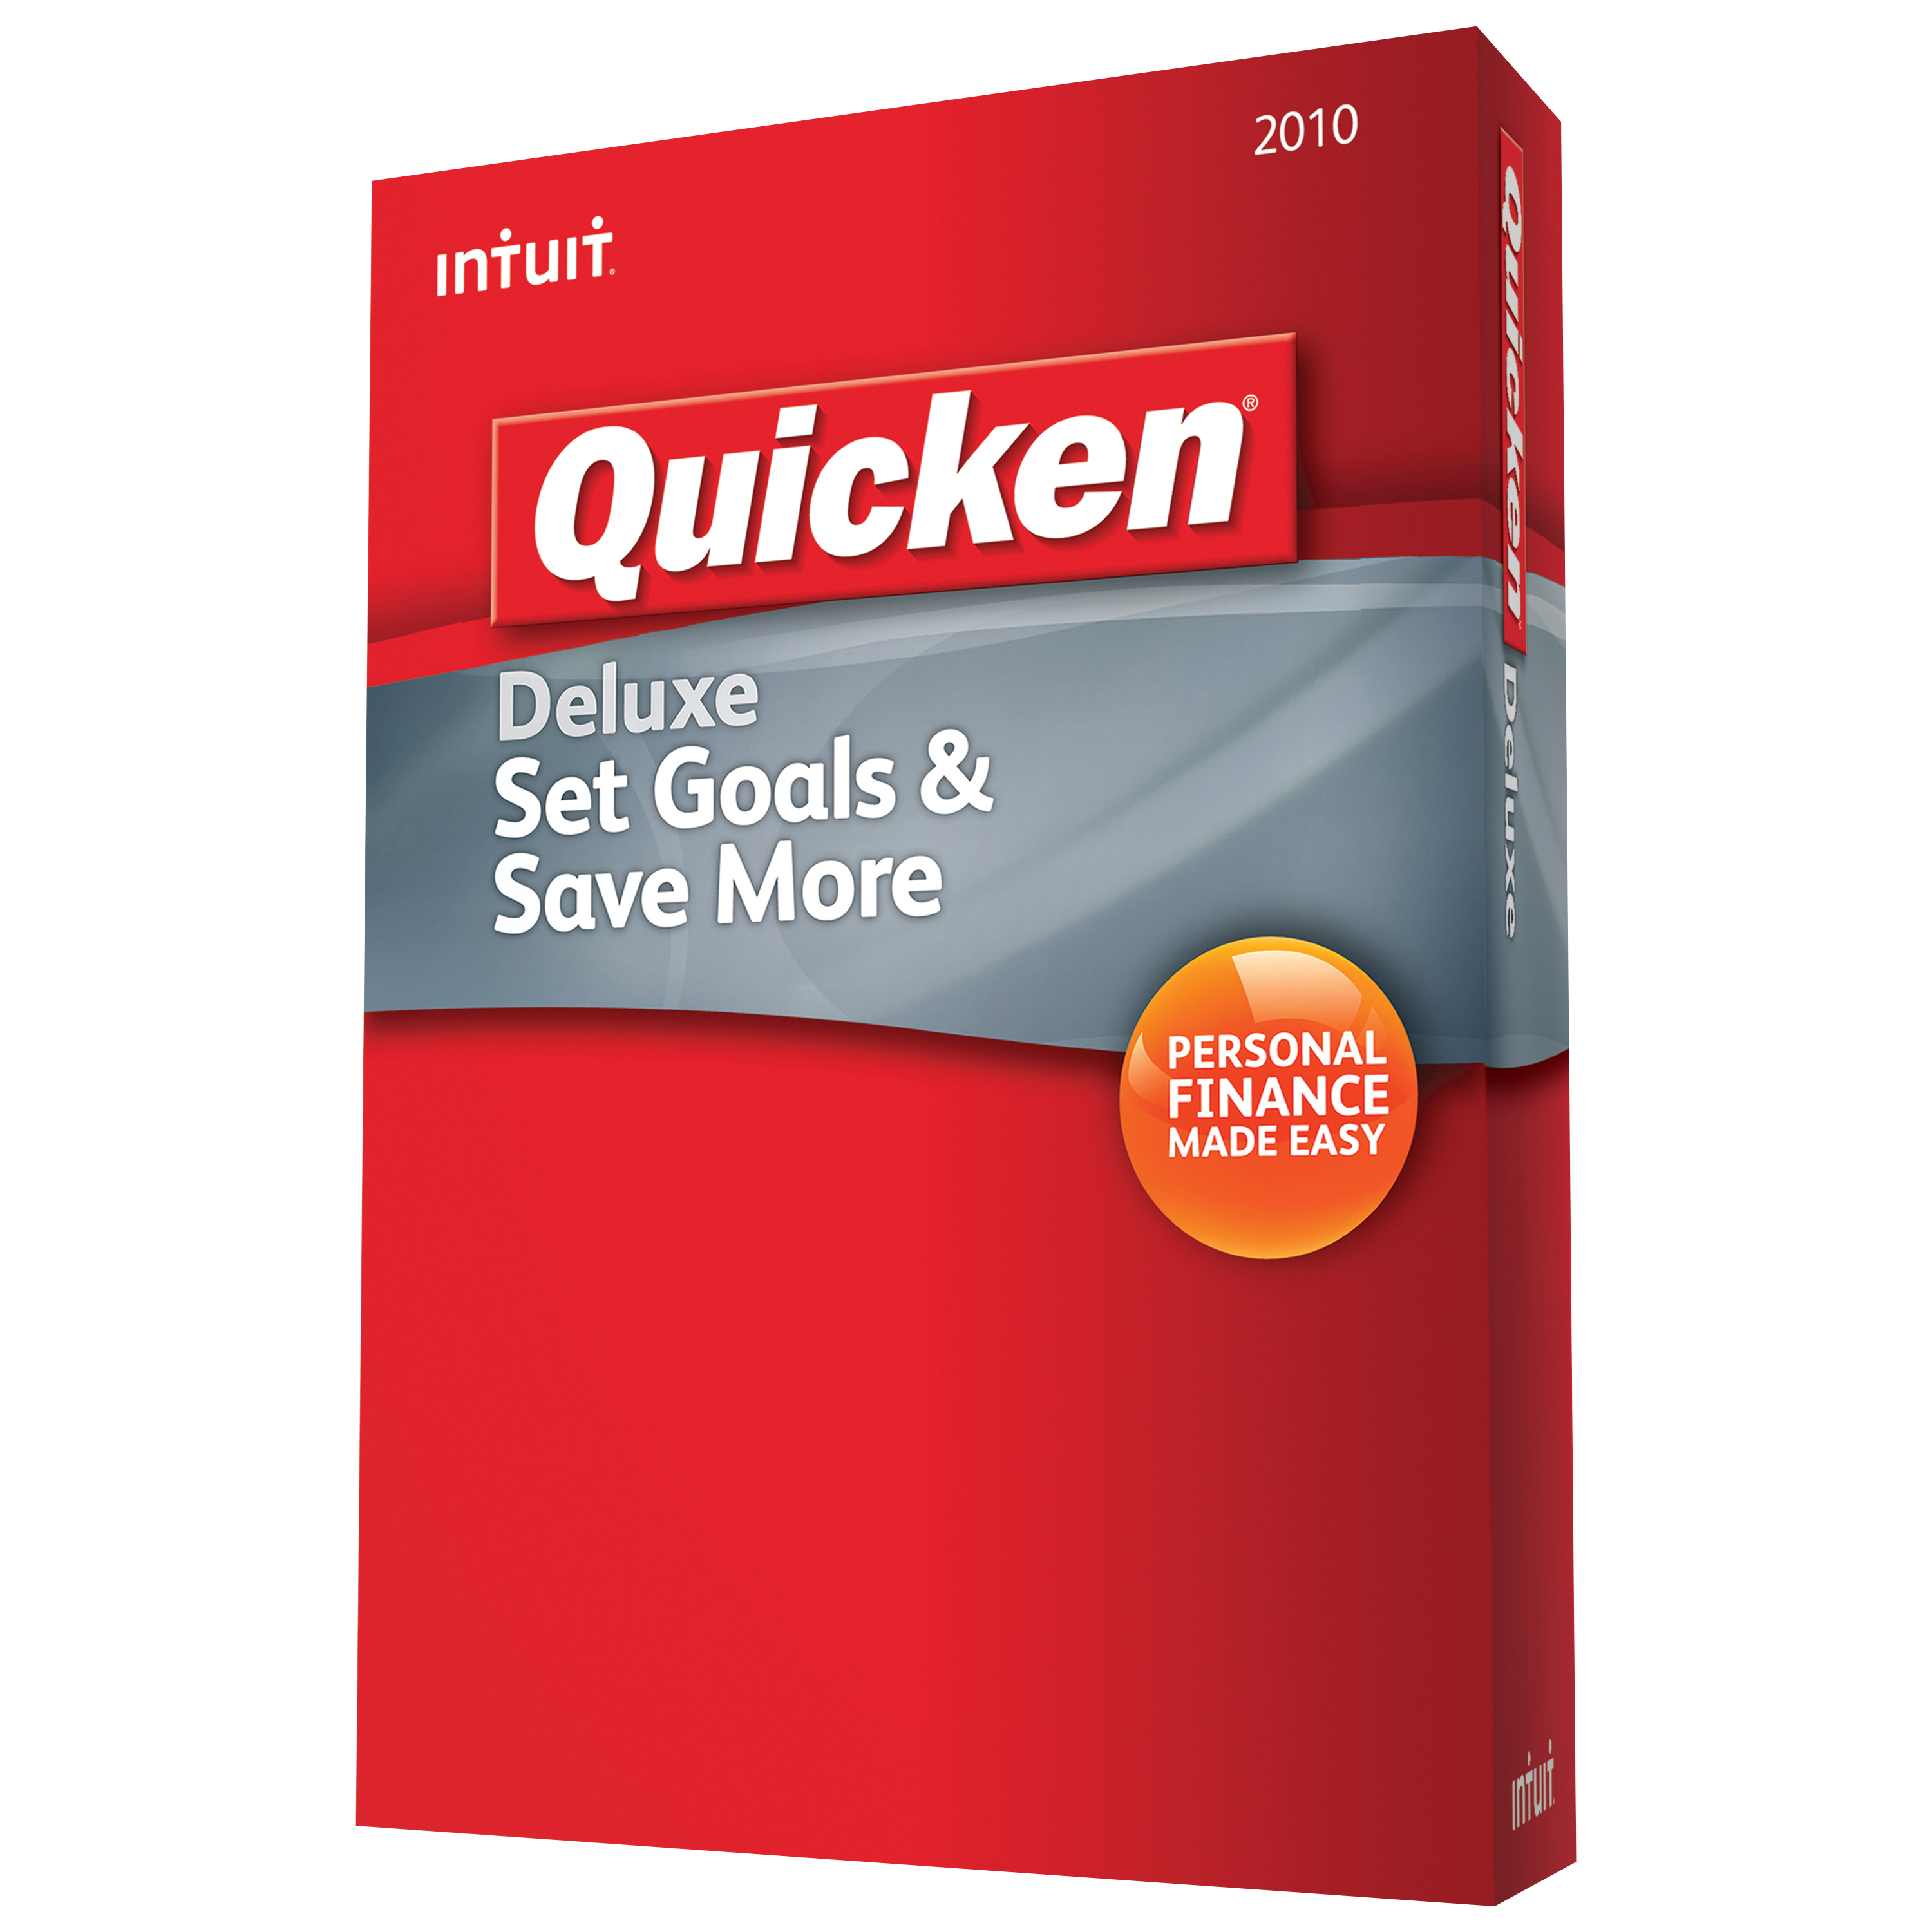 quicken home business 2017 for windows